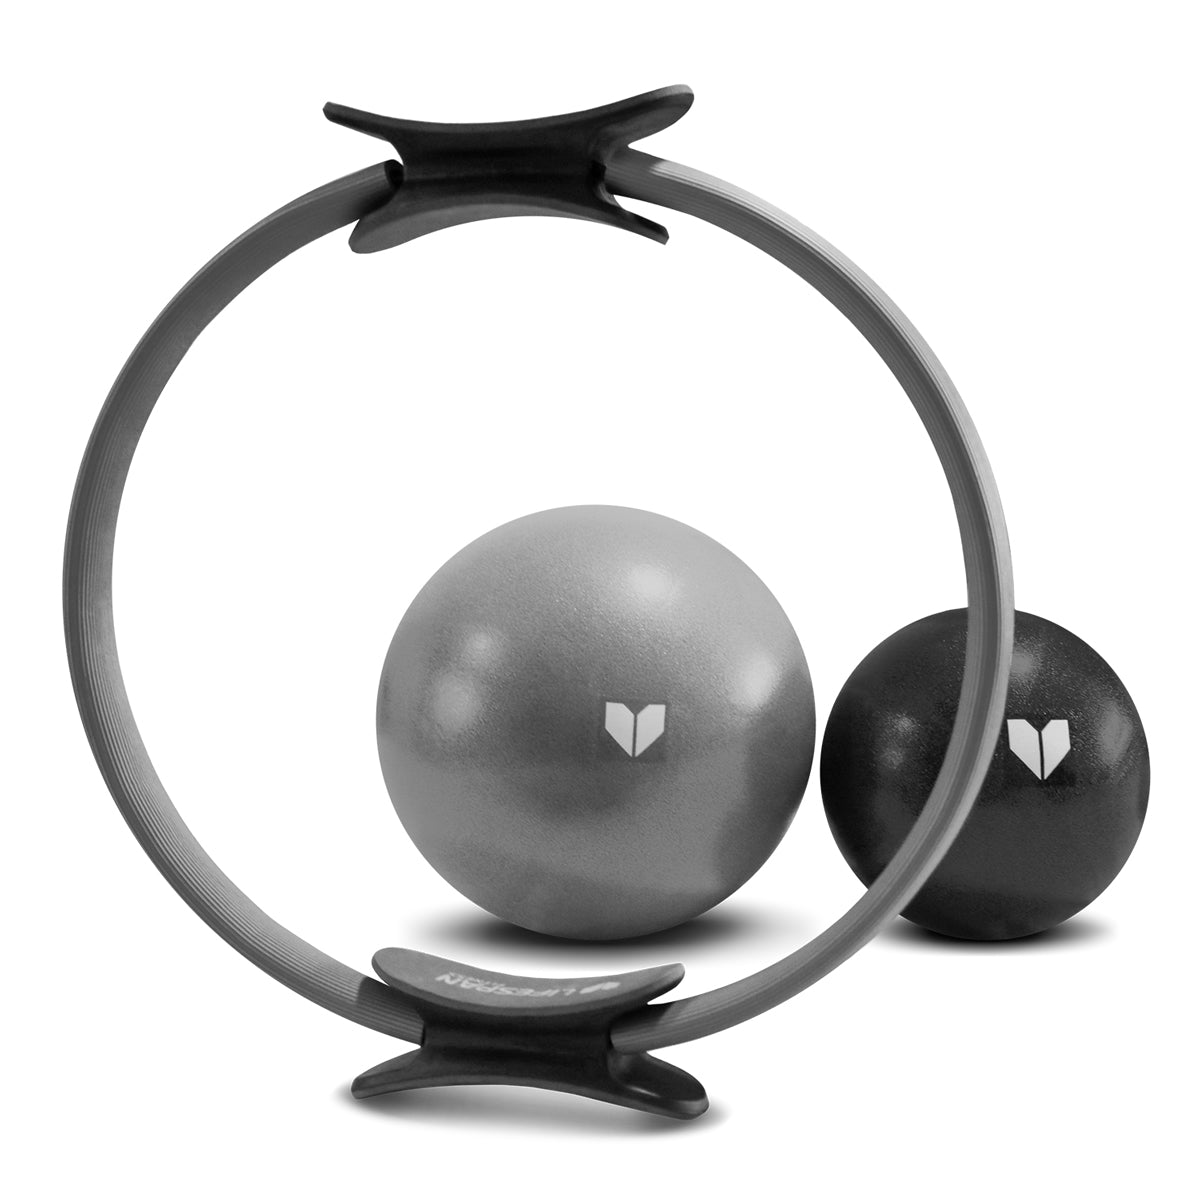 Lifespan Fitness Pilates Essentials Set - Pilates Ring with Small and